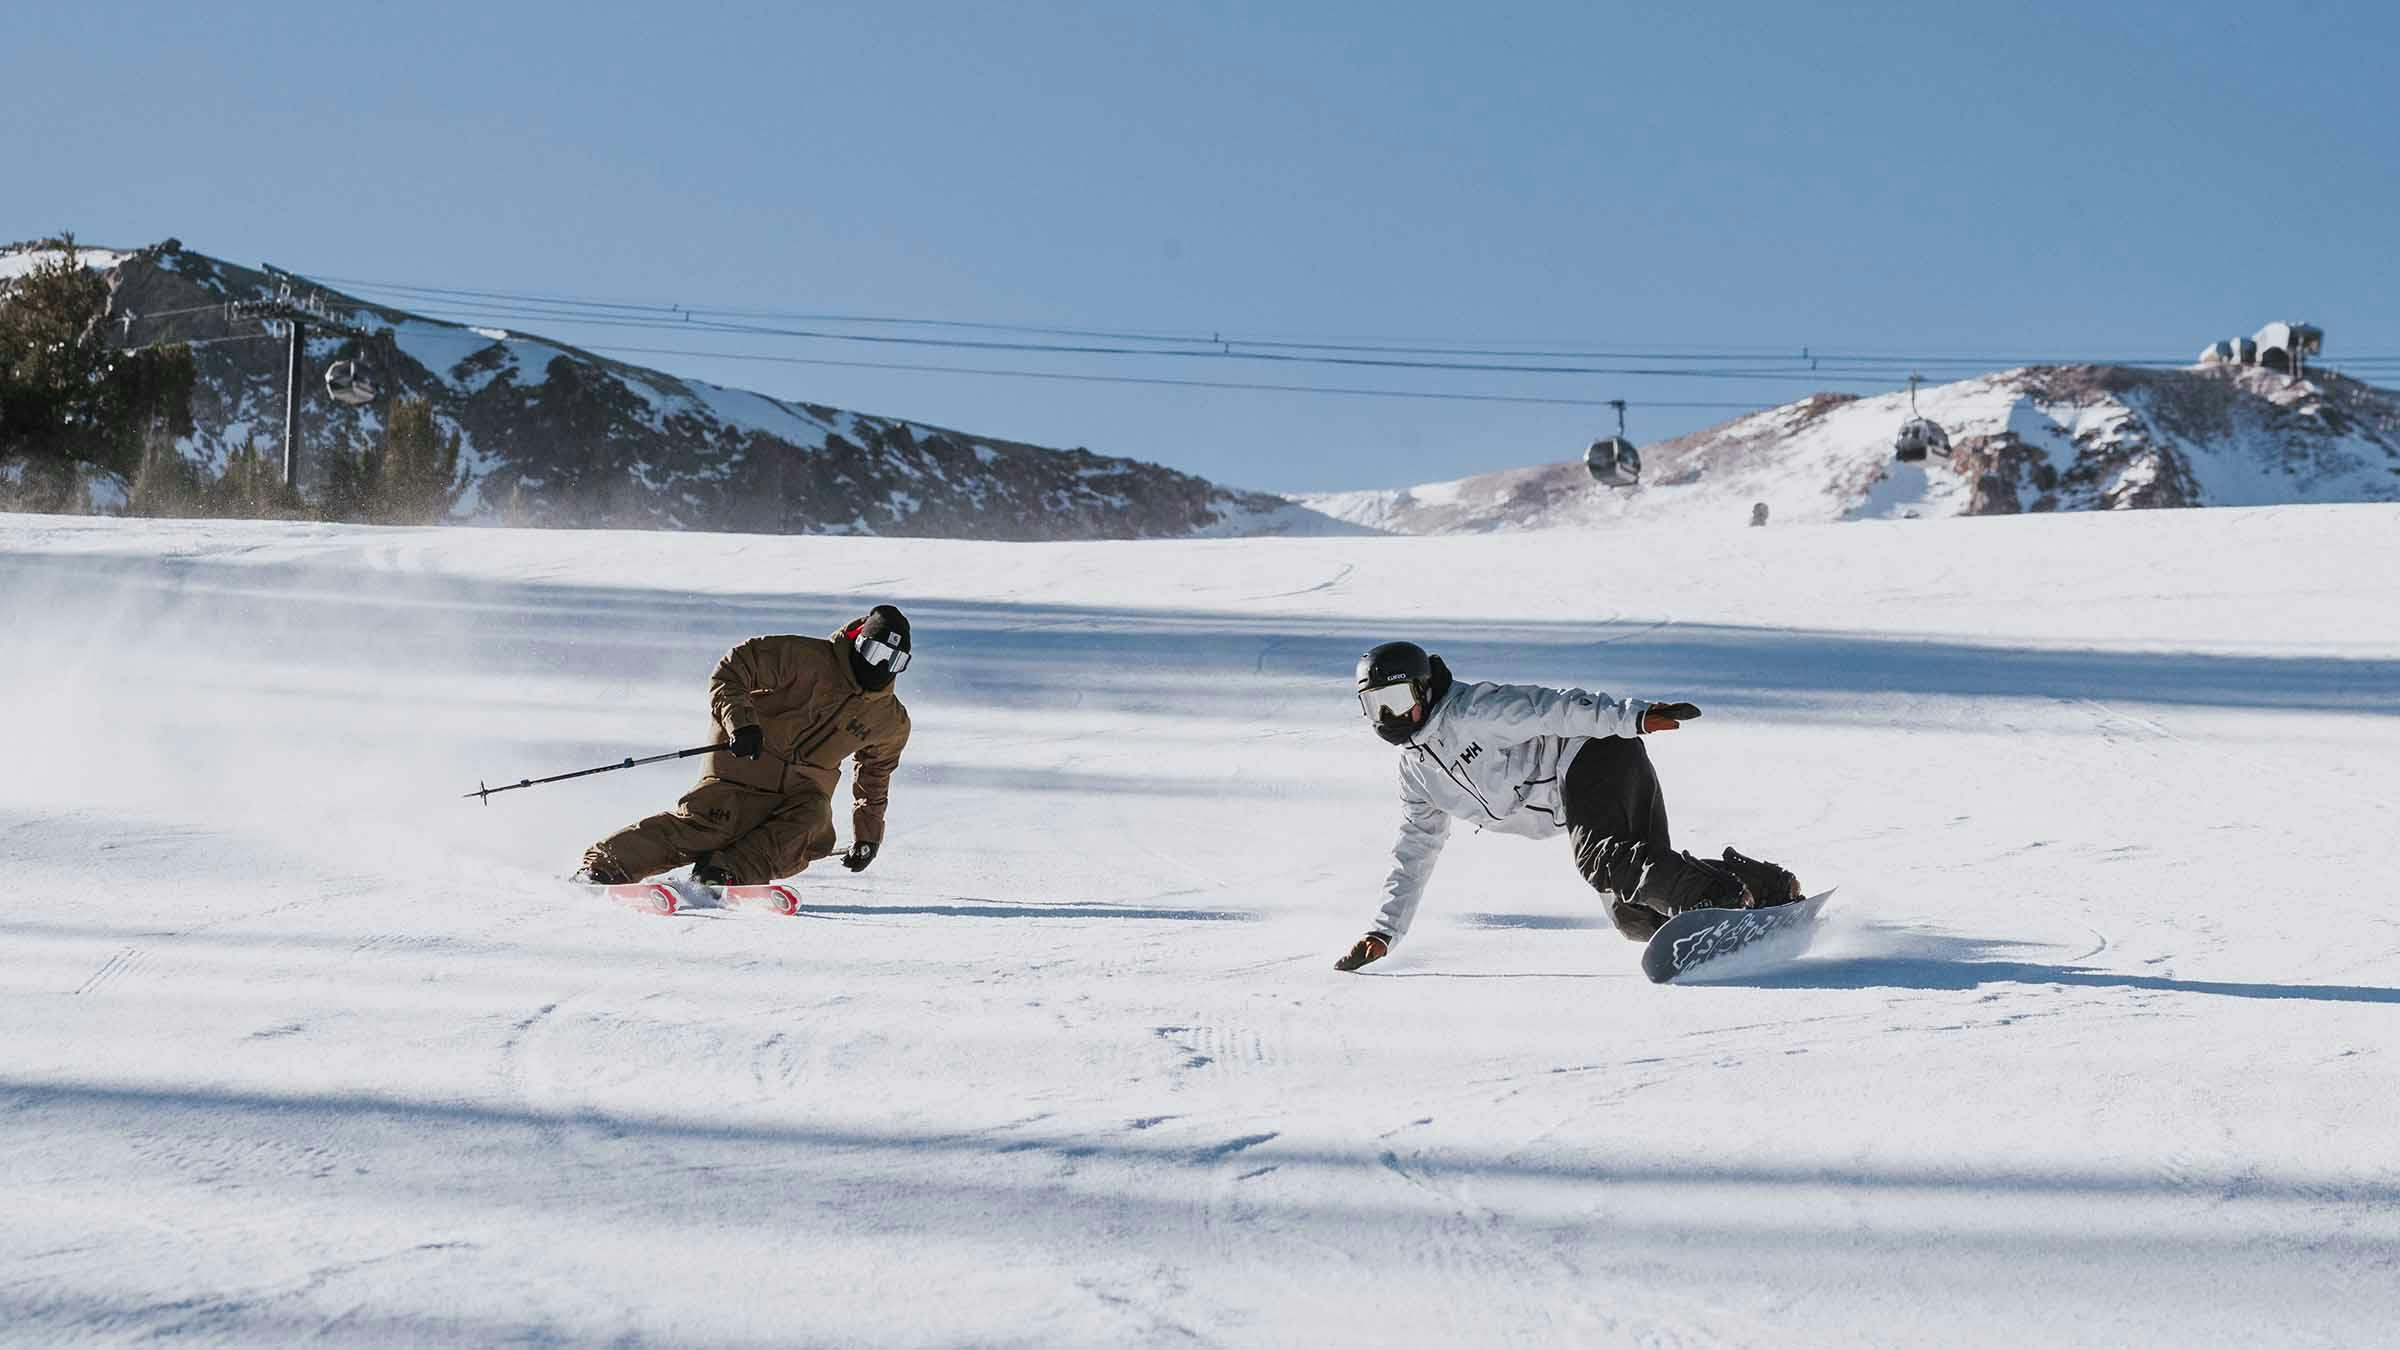 Skier and snowboarder riding groomers